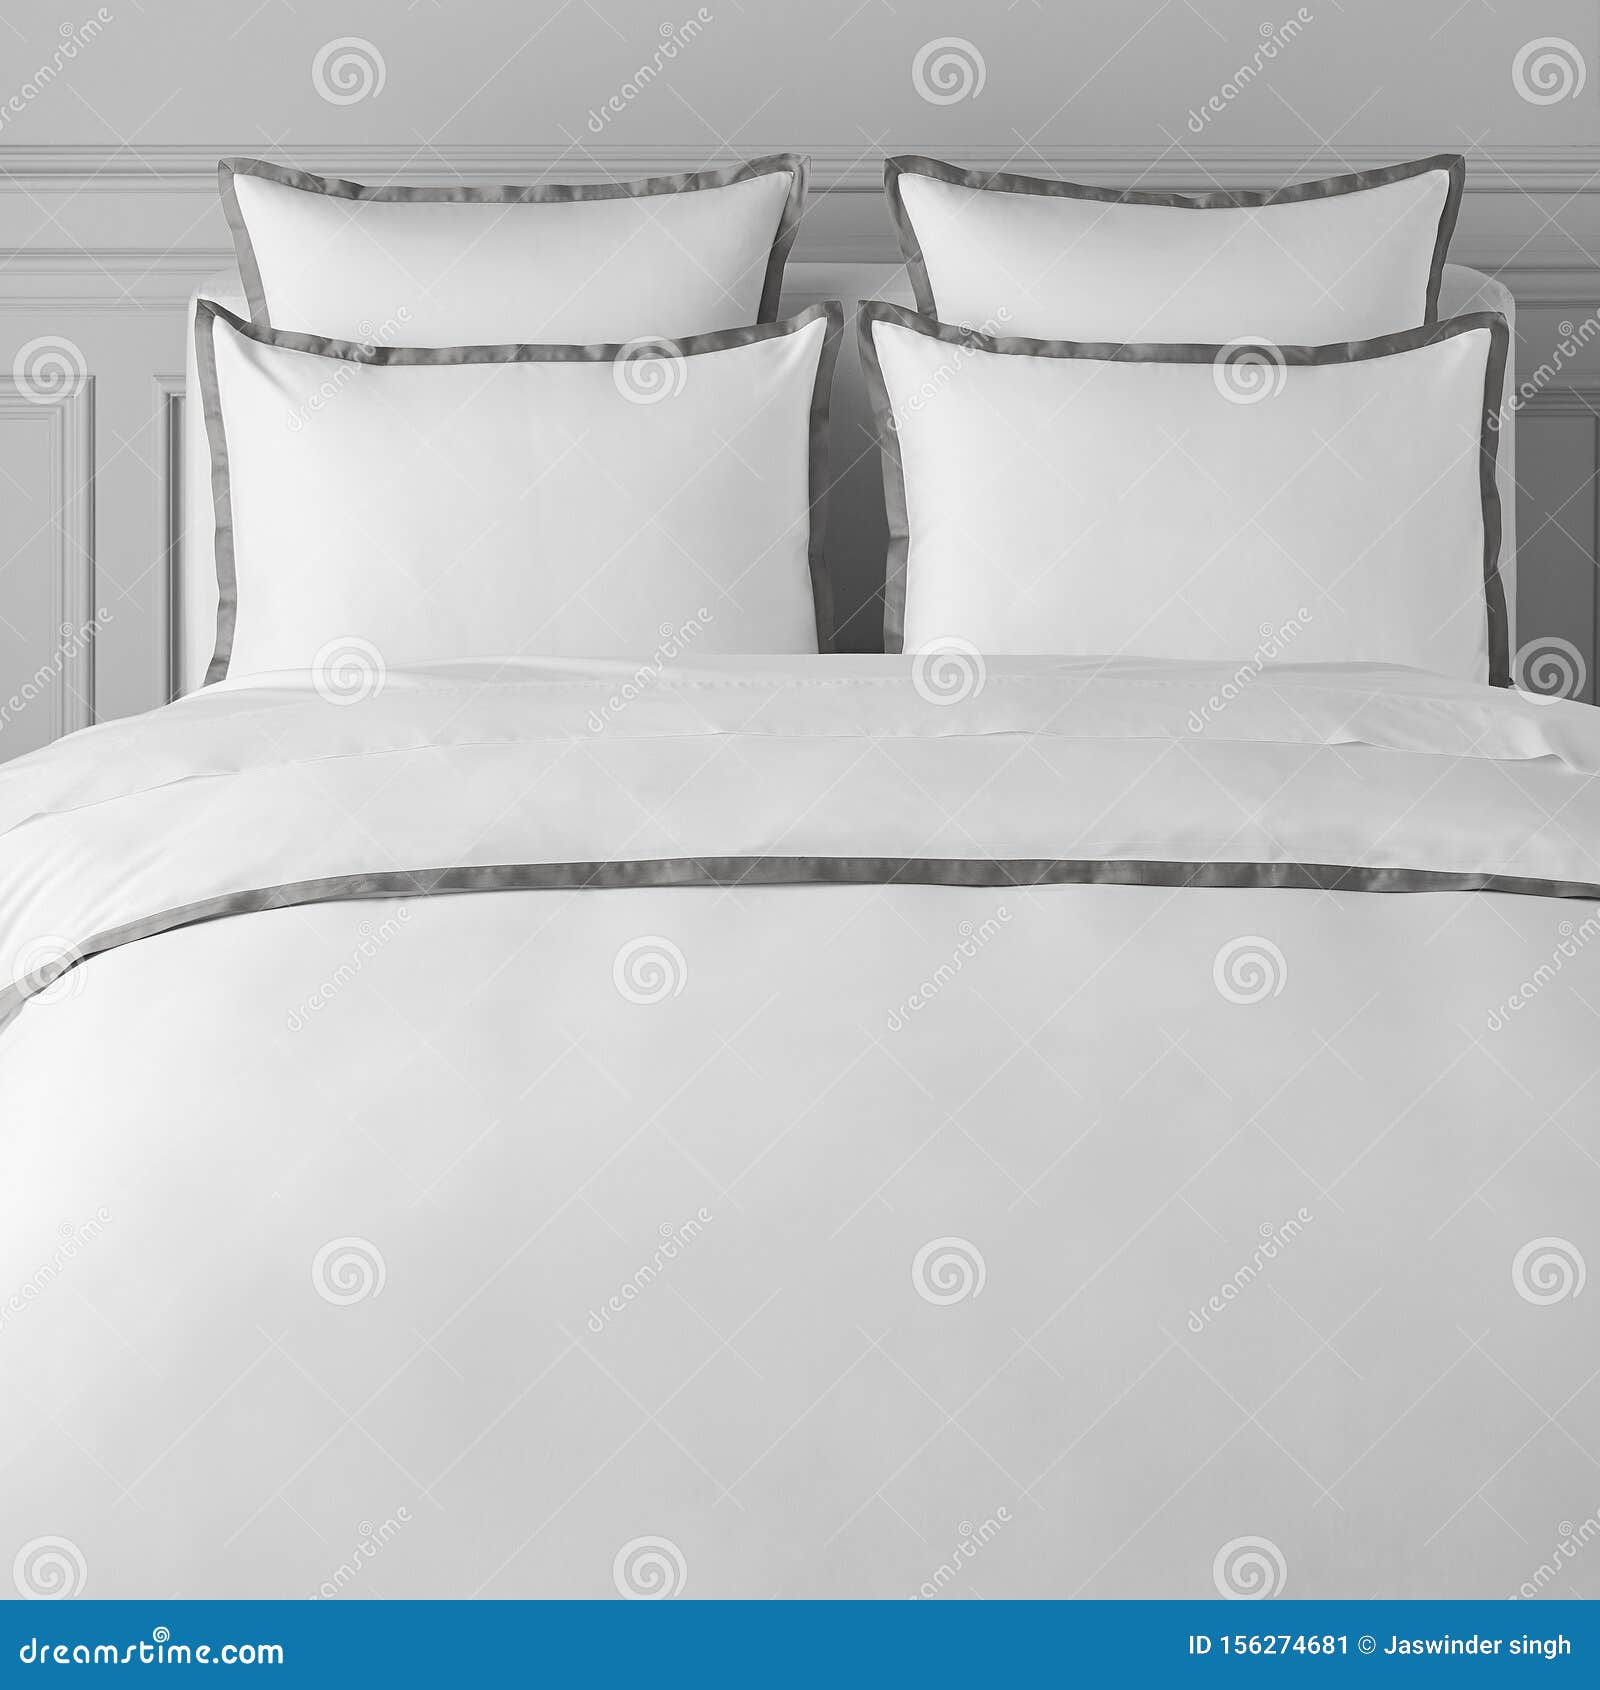 White Bed Sheets And Pillows Stock Image Image Of Black Apartment 156274681